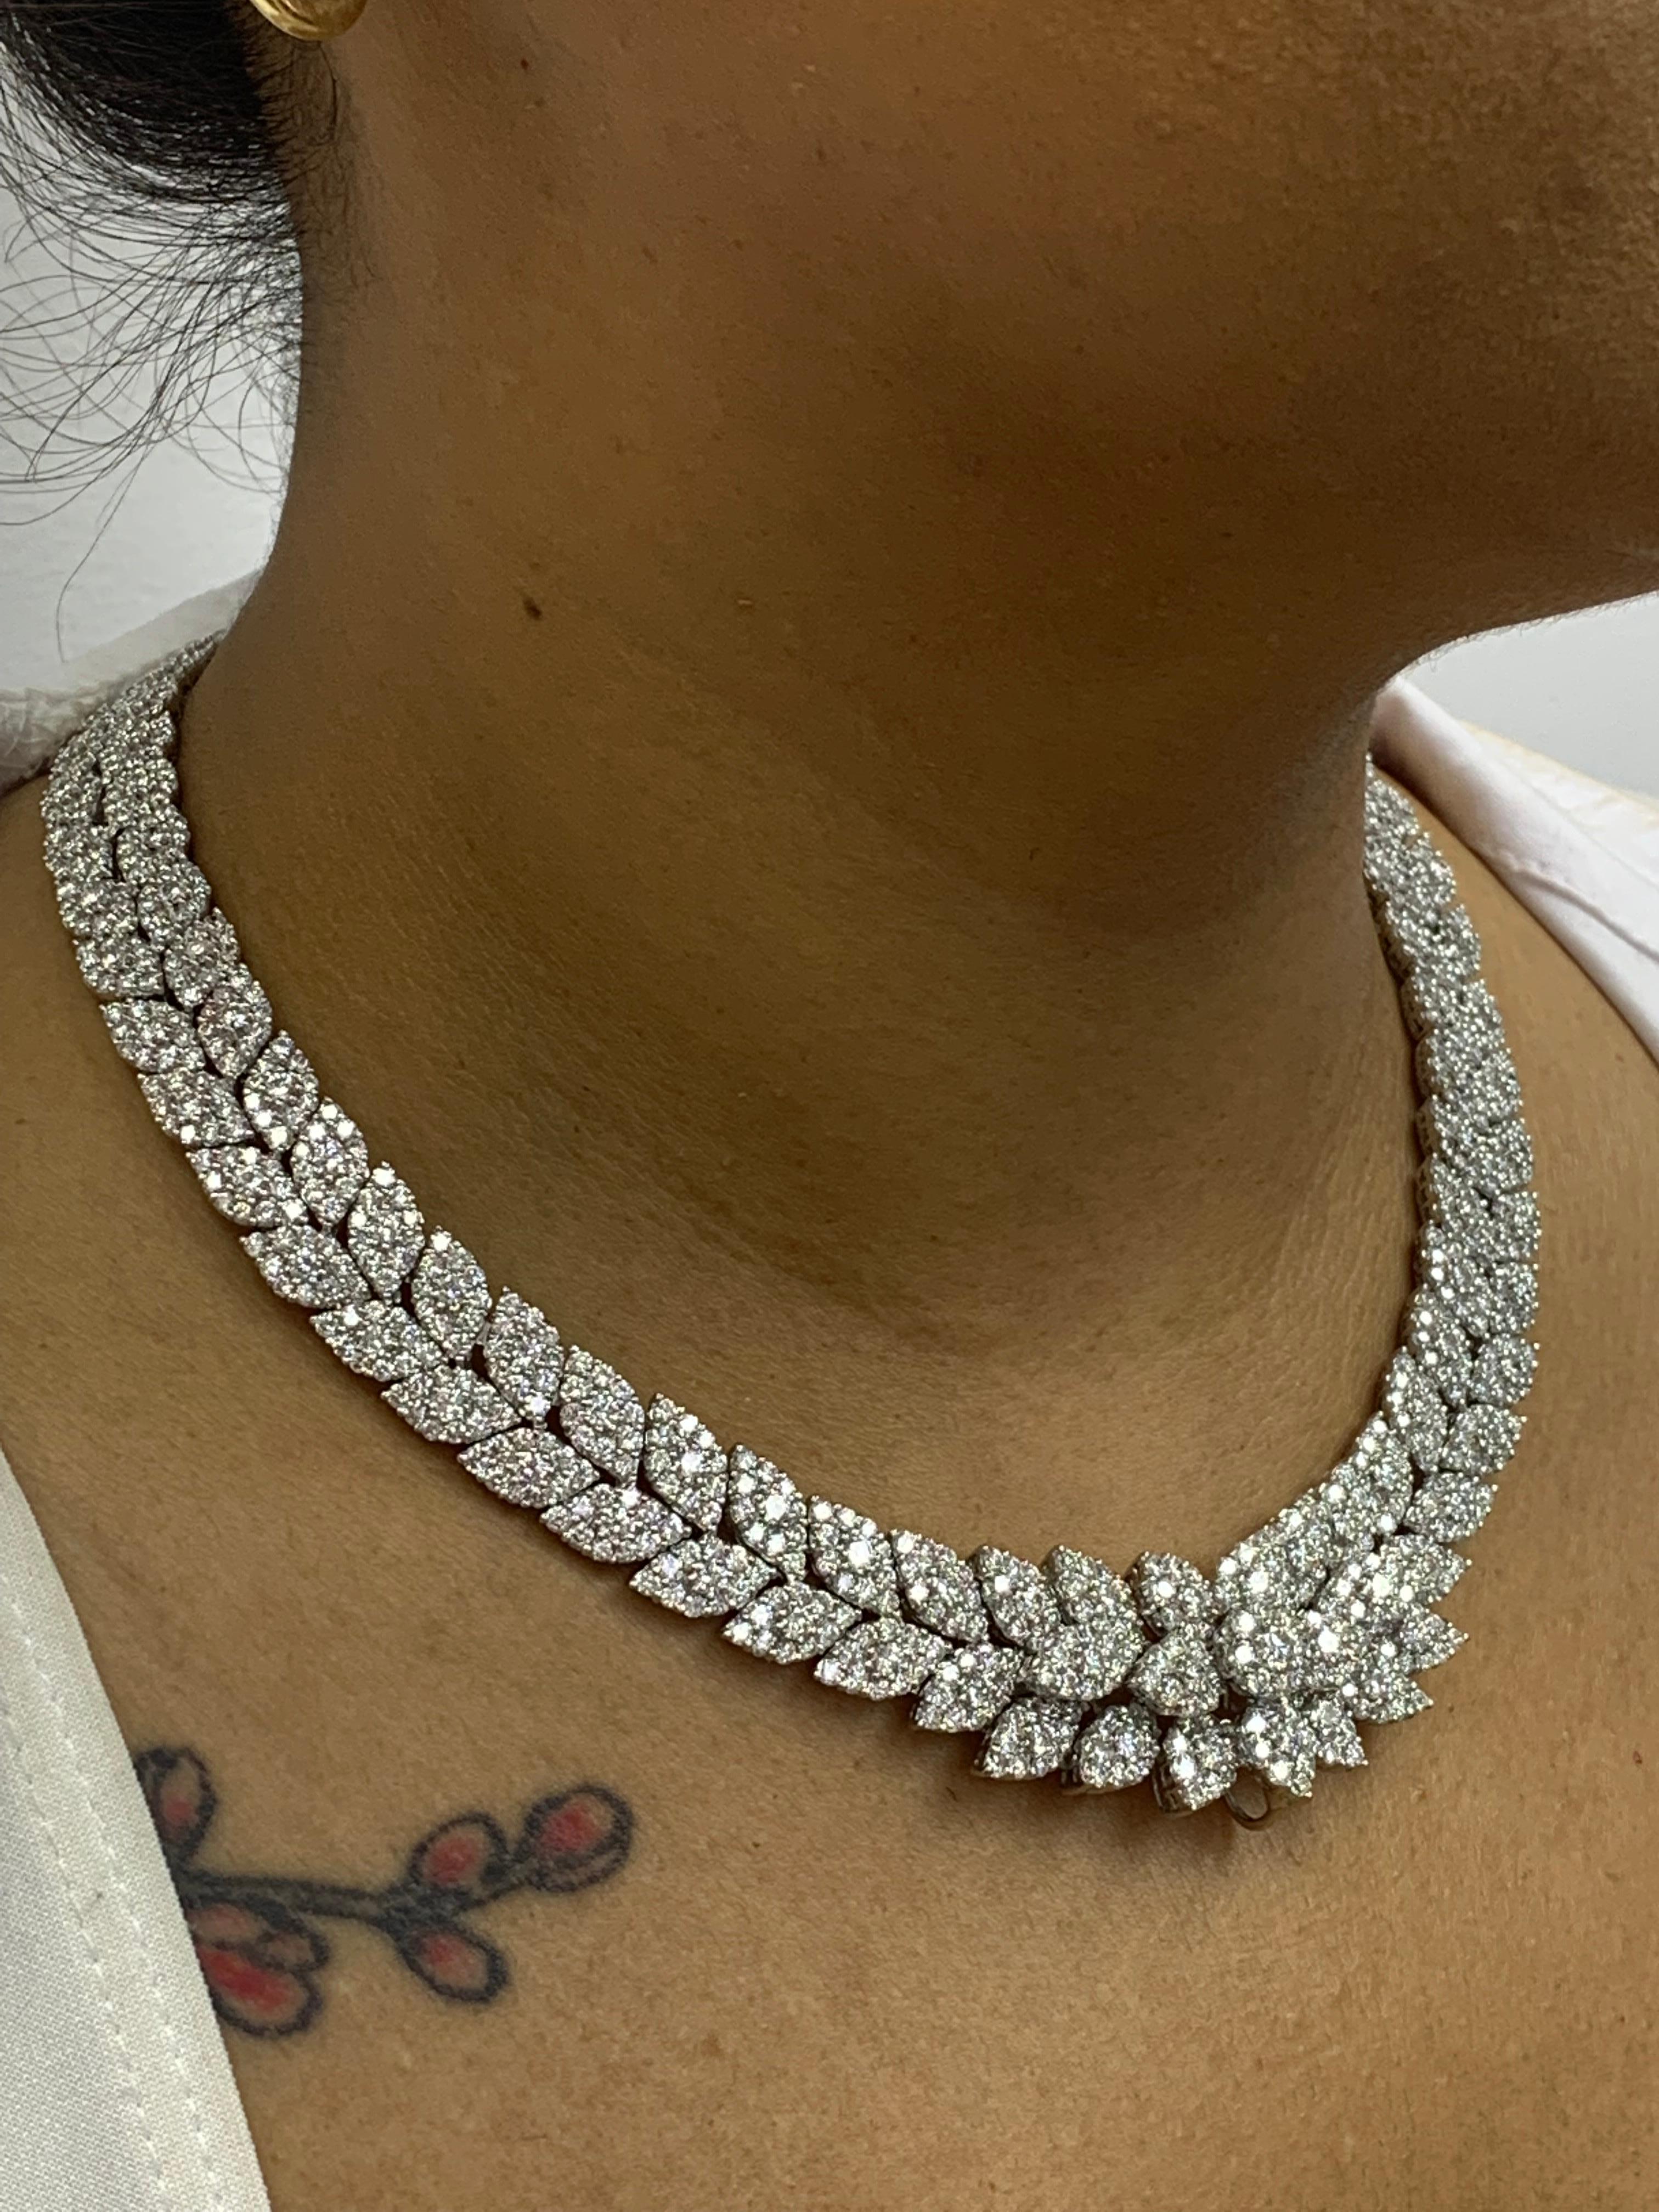 39.58 Carat Cluster Diamond Necklace in 18K White Gold For Sale 8